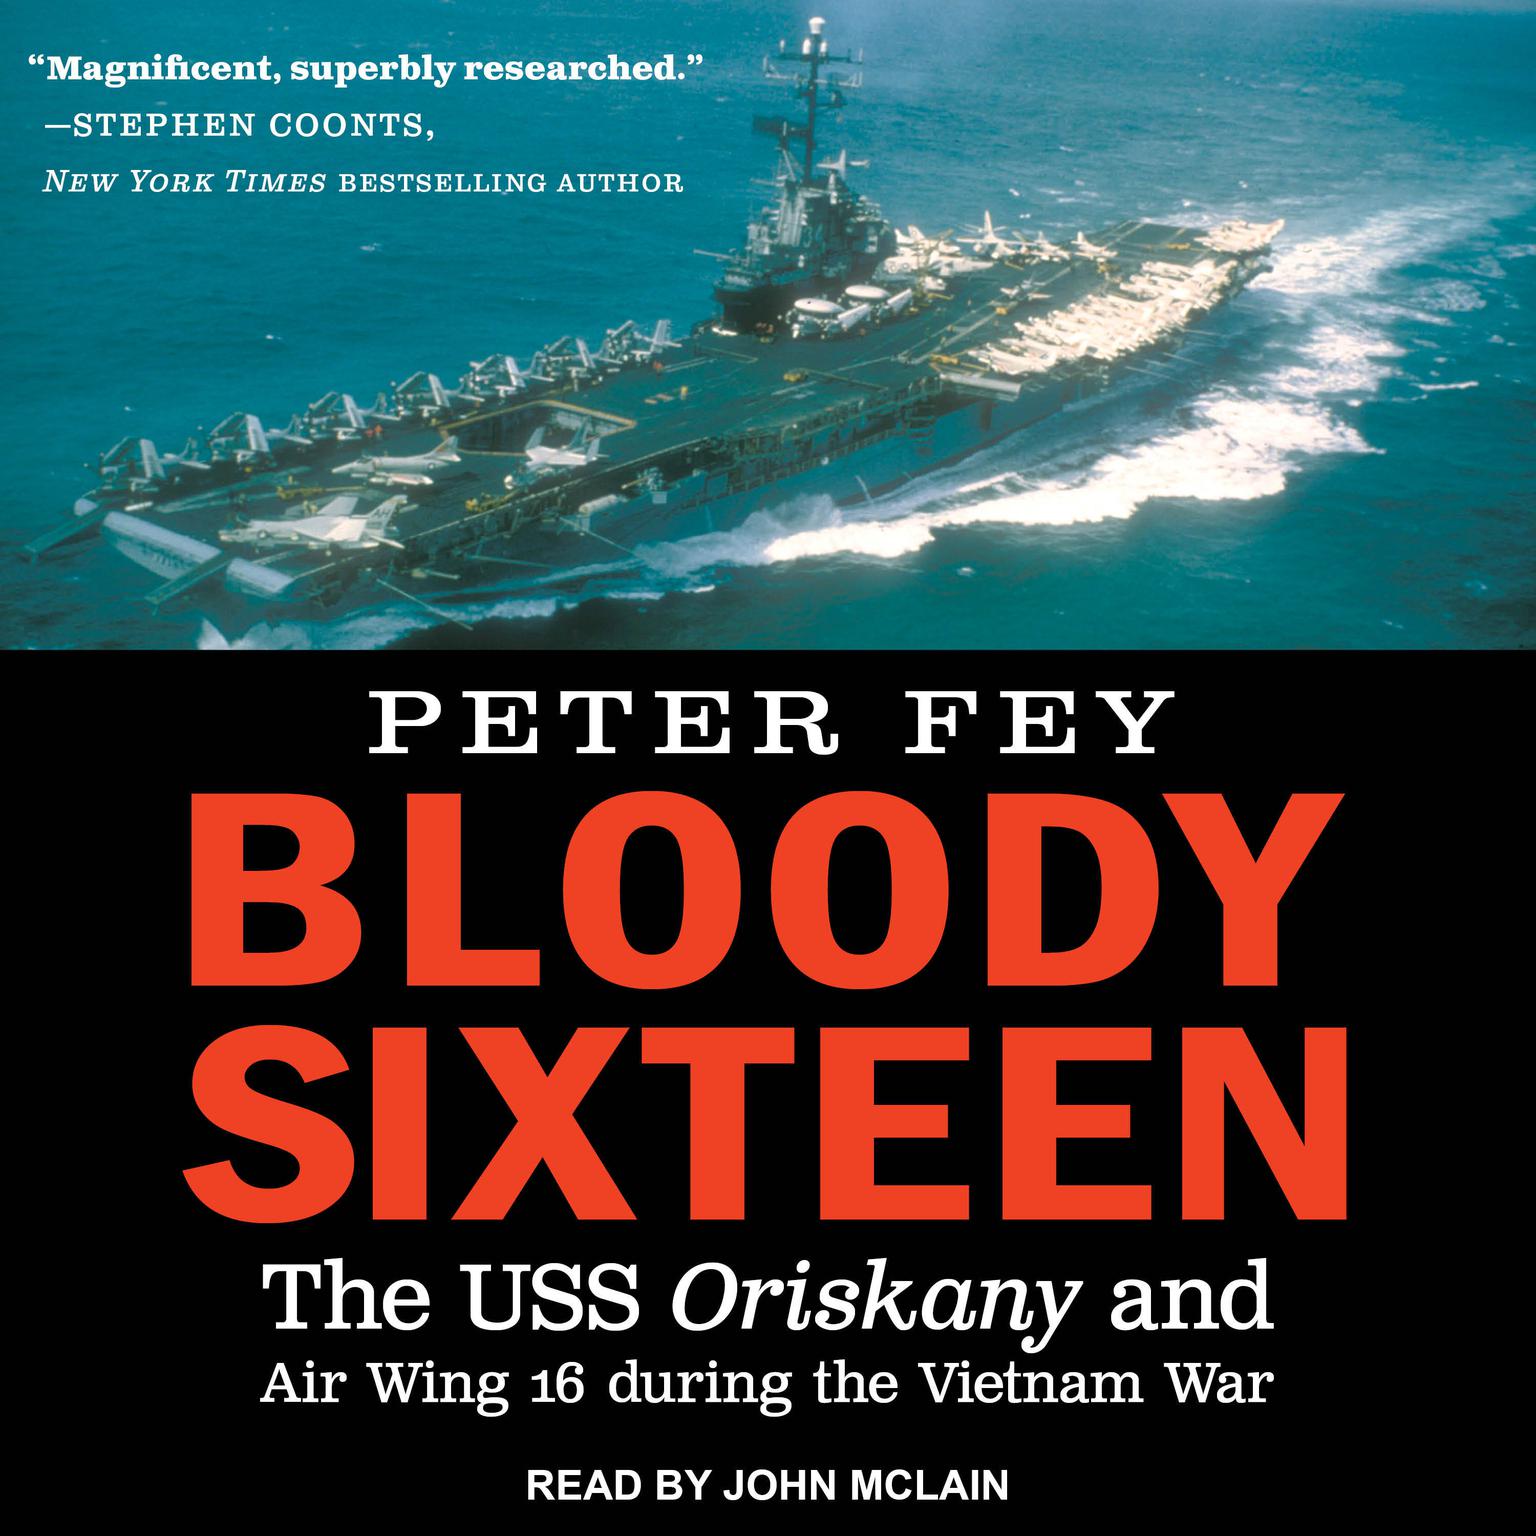 Bloody Sixteen: The USS Oriskany and Air Wing 16 during the Vietnam War Audiobook, by Peter Fey